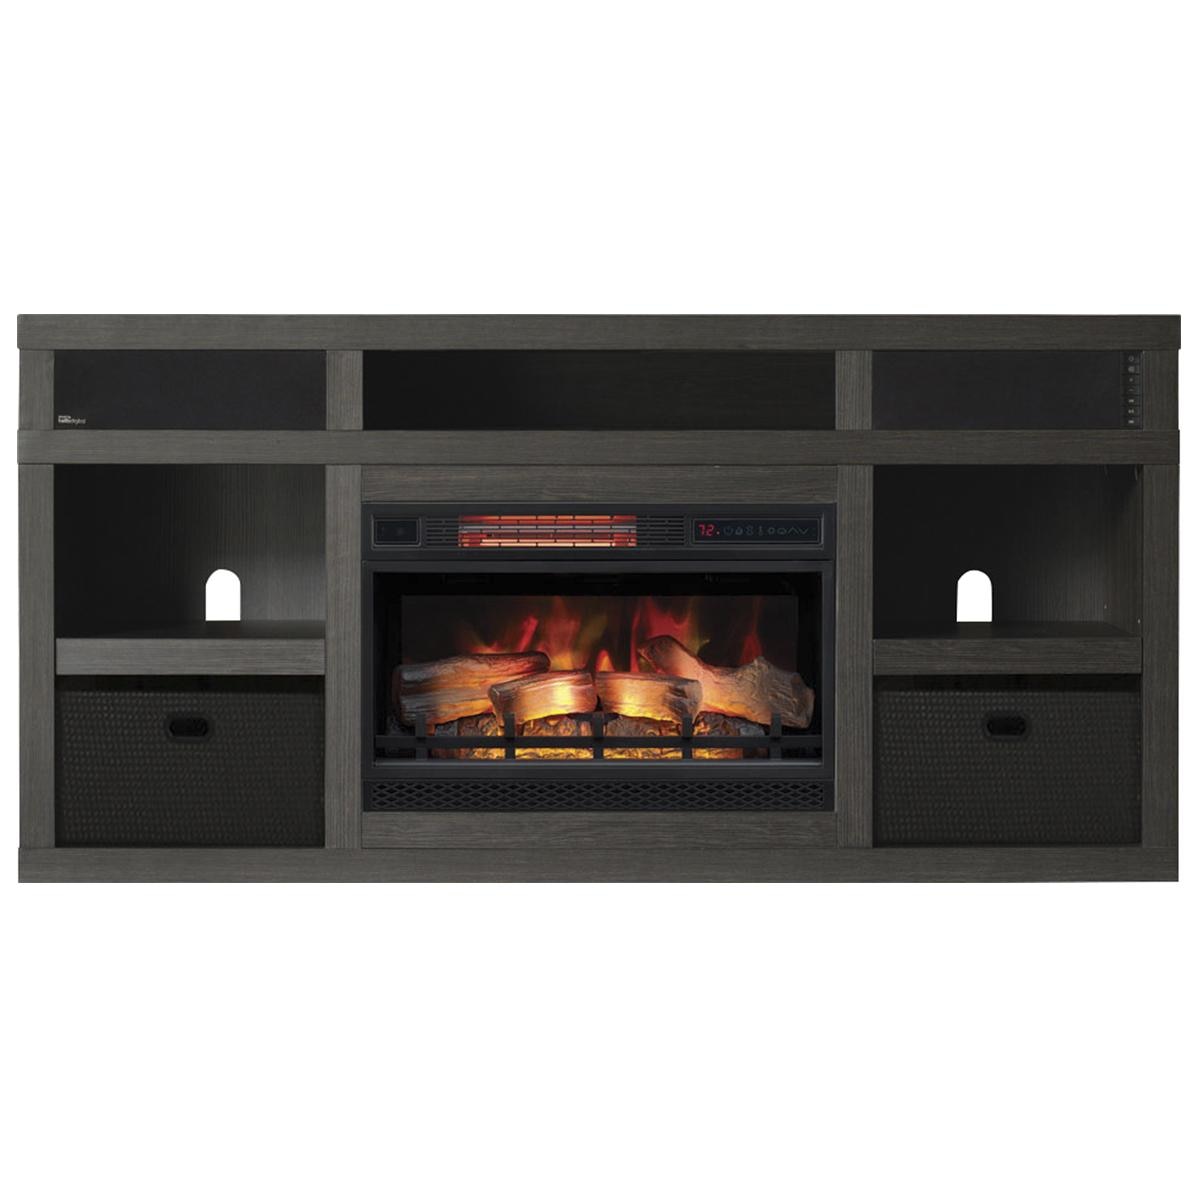 Tv Stands for Flat Screens with Fireplace Unique Fabio Flames Greatlin 3 Piece Fireplace Entertainment Wall